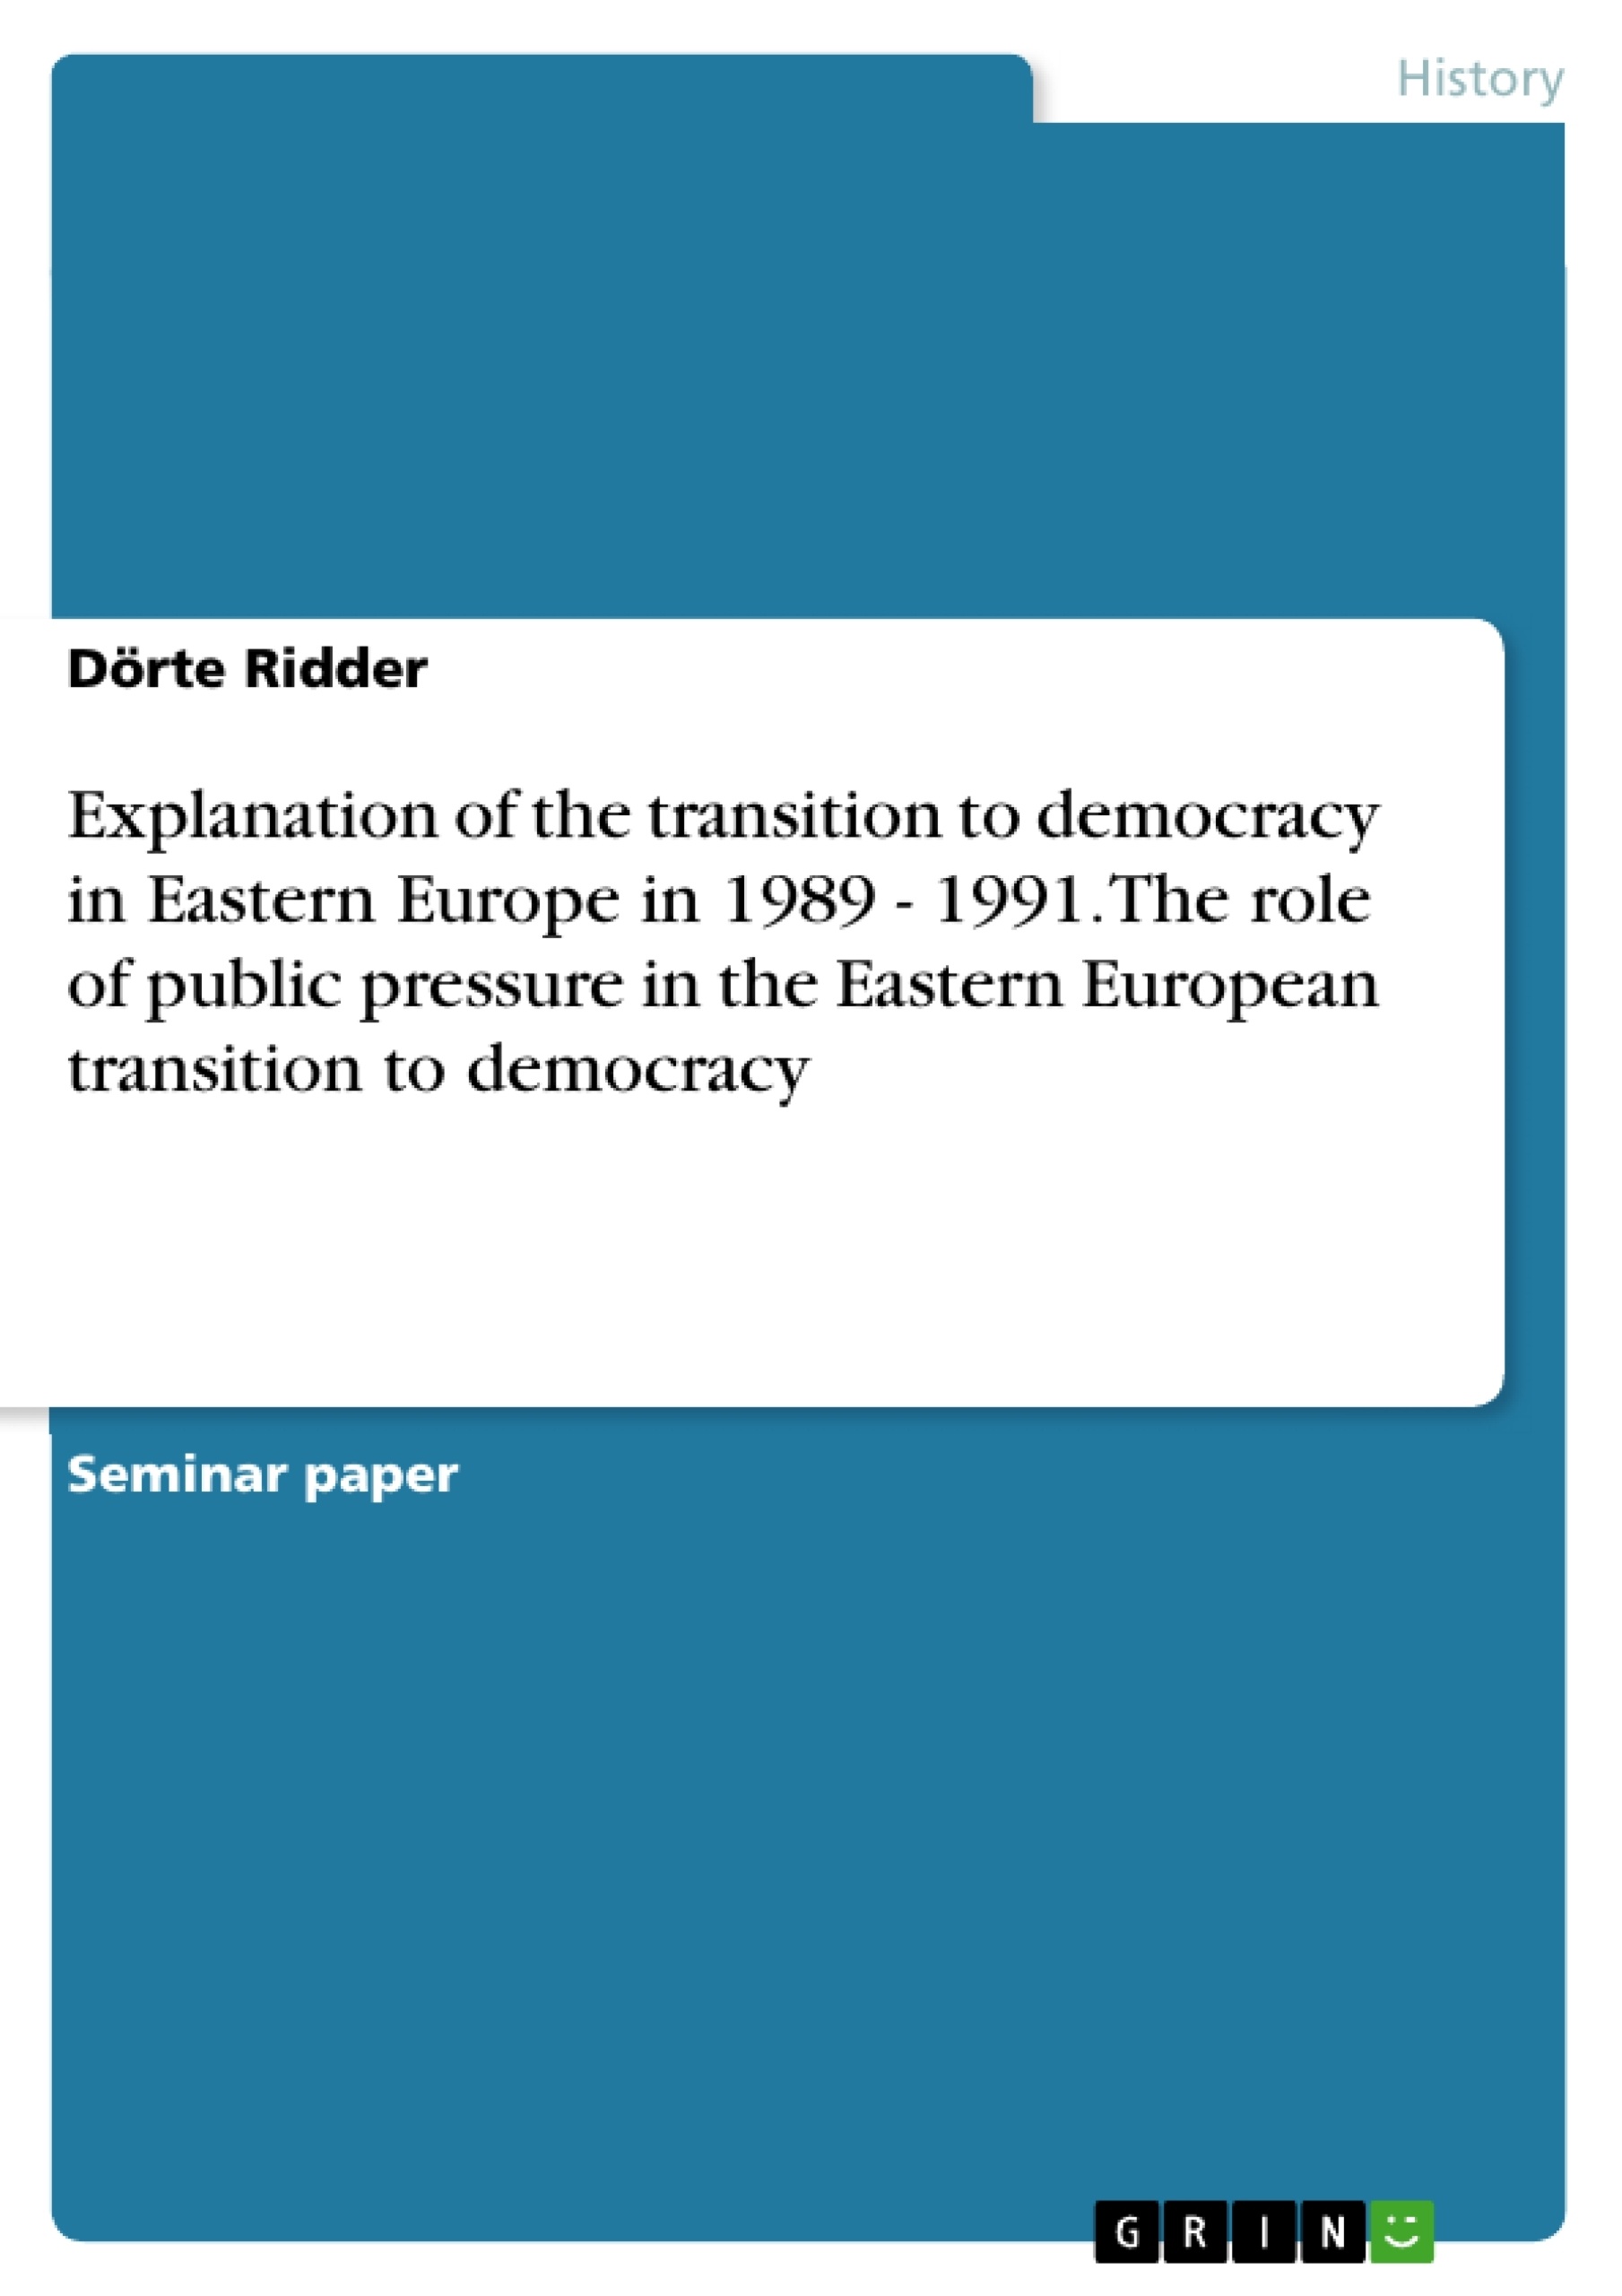 Title: Explanation of the transition to democracy in Eastern Europe in 1989 - 1991. The role of public pressure in the Eastern European transition to democracy